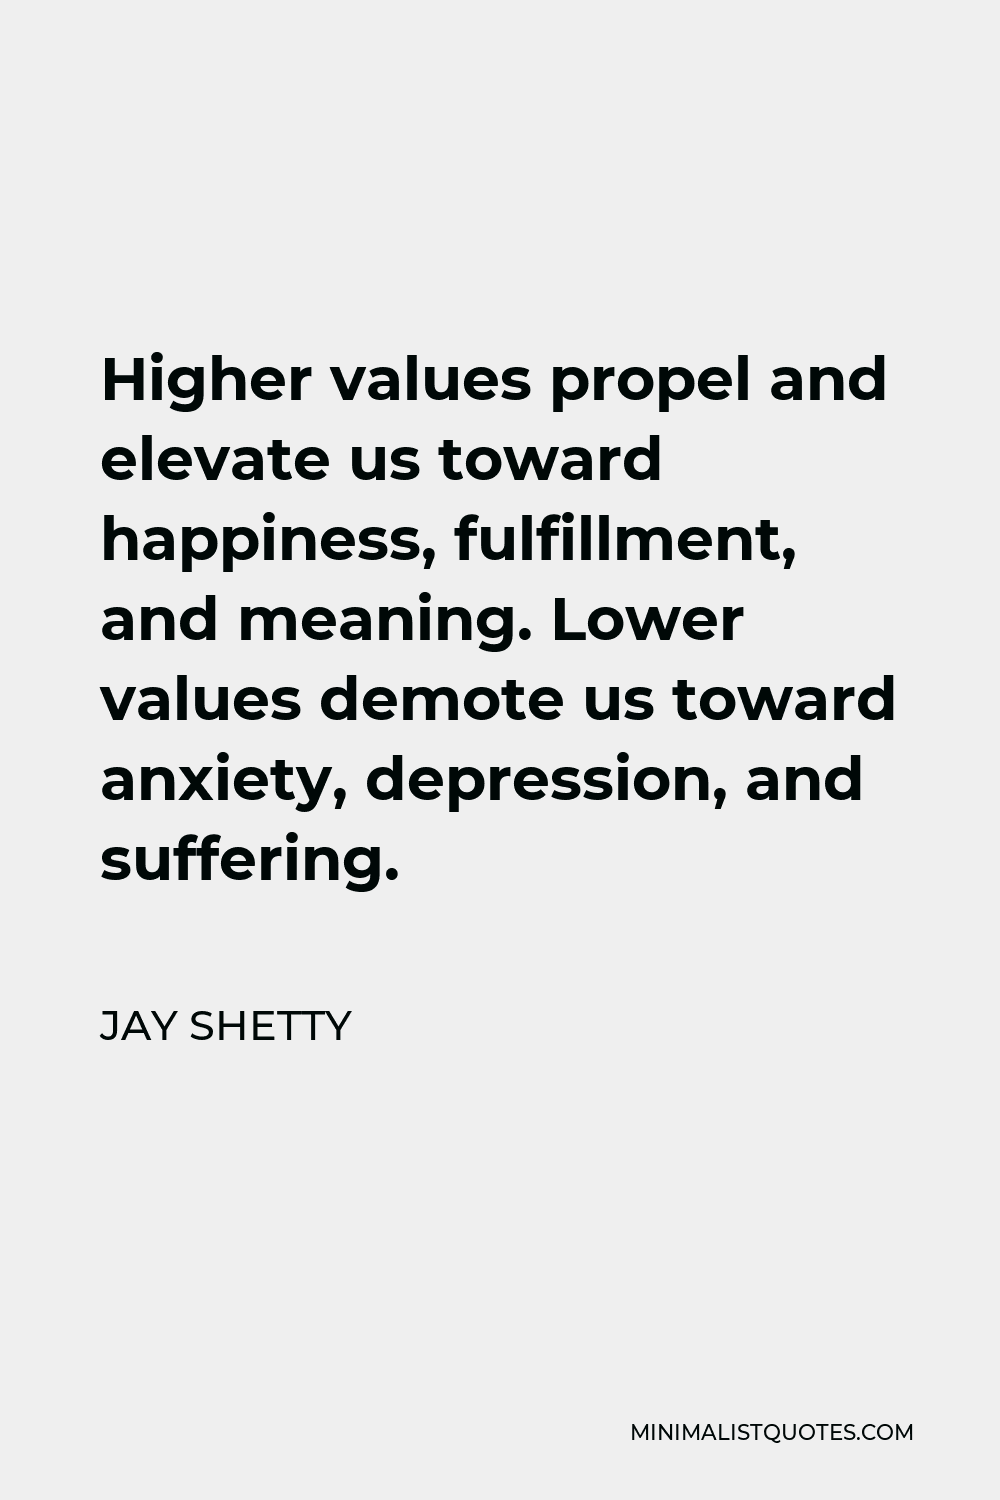 Jay Shetty Quote - Higher values propel and elevate us toward happiness, fulfillment, and meaning. Lower values demote us toward anxiety, depression, and suffering.